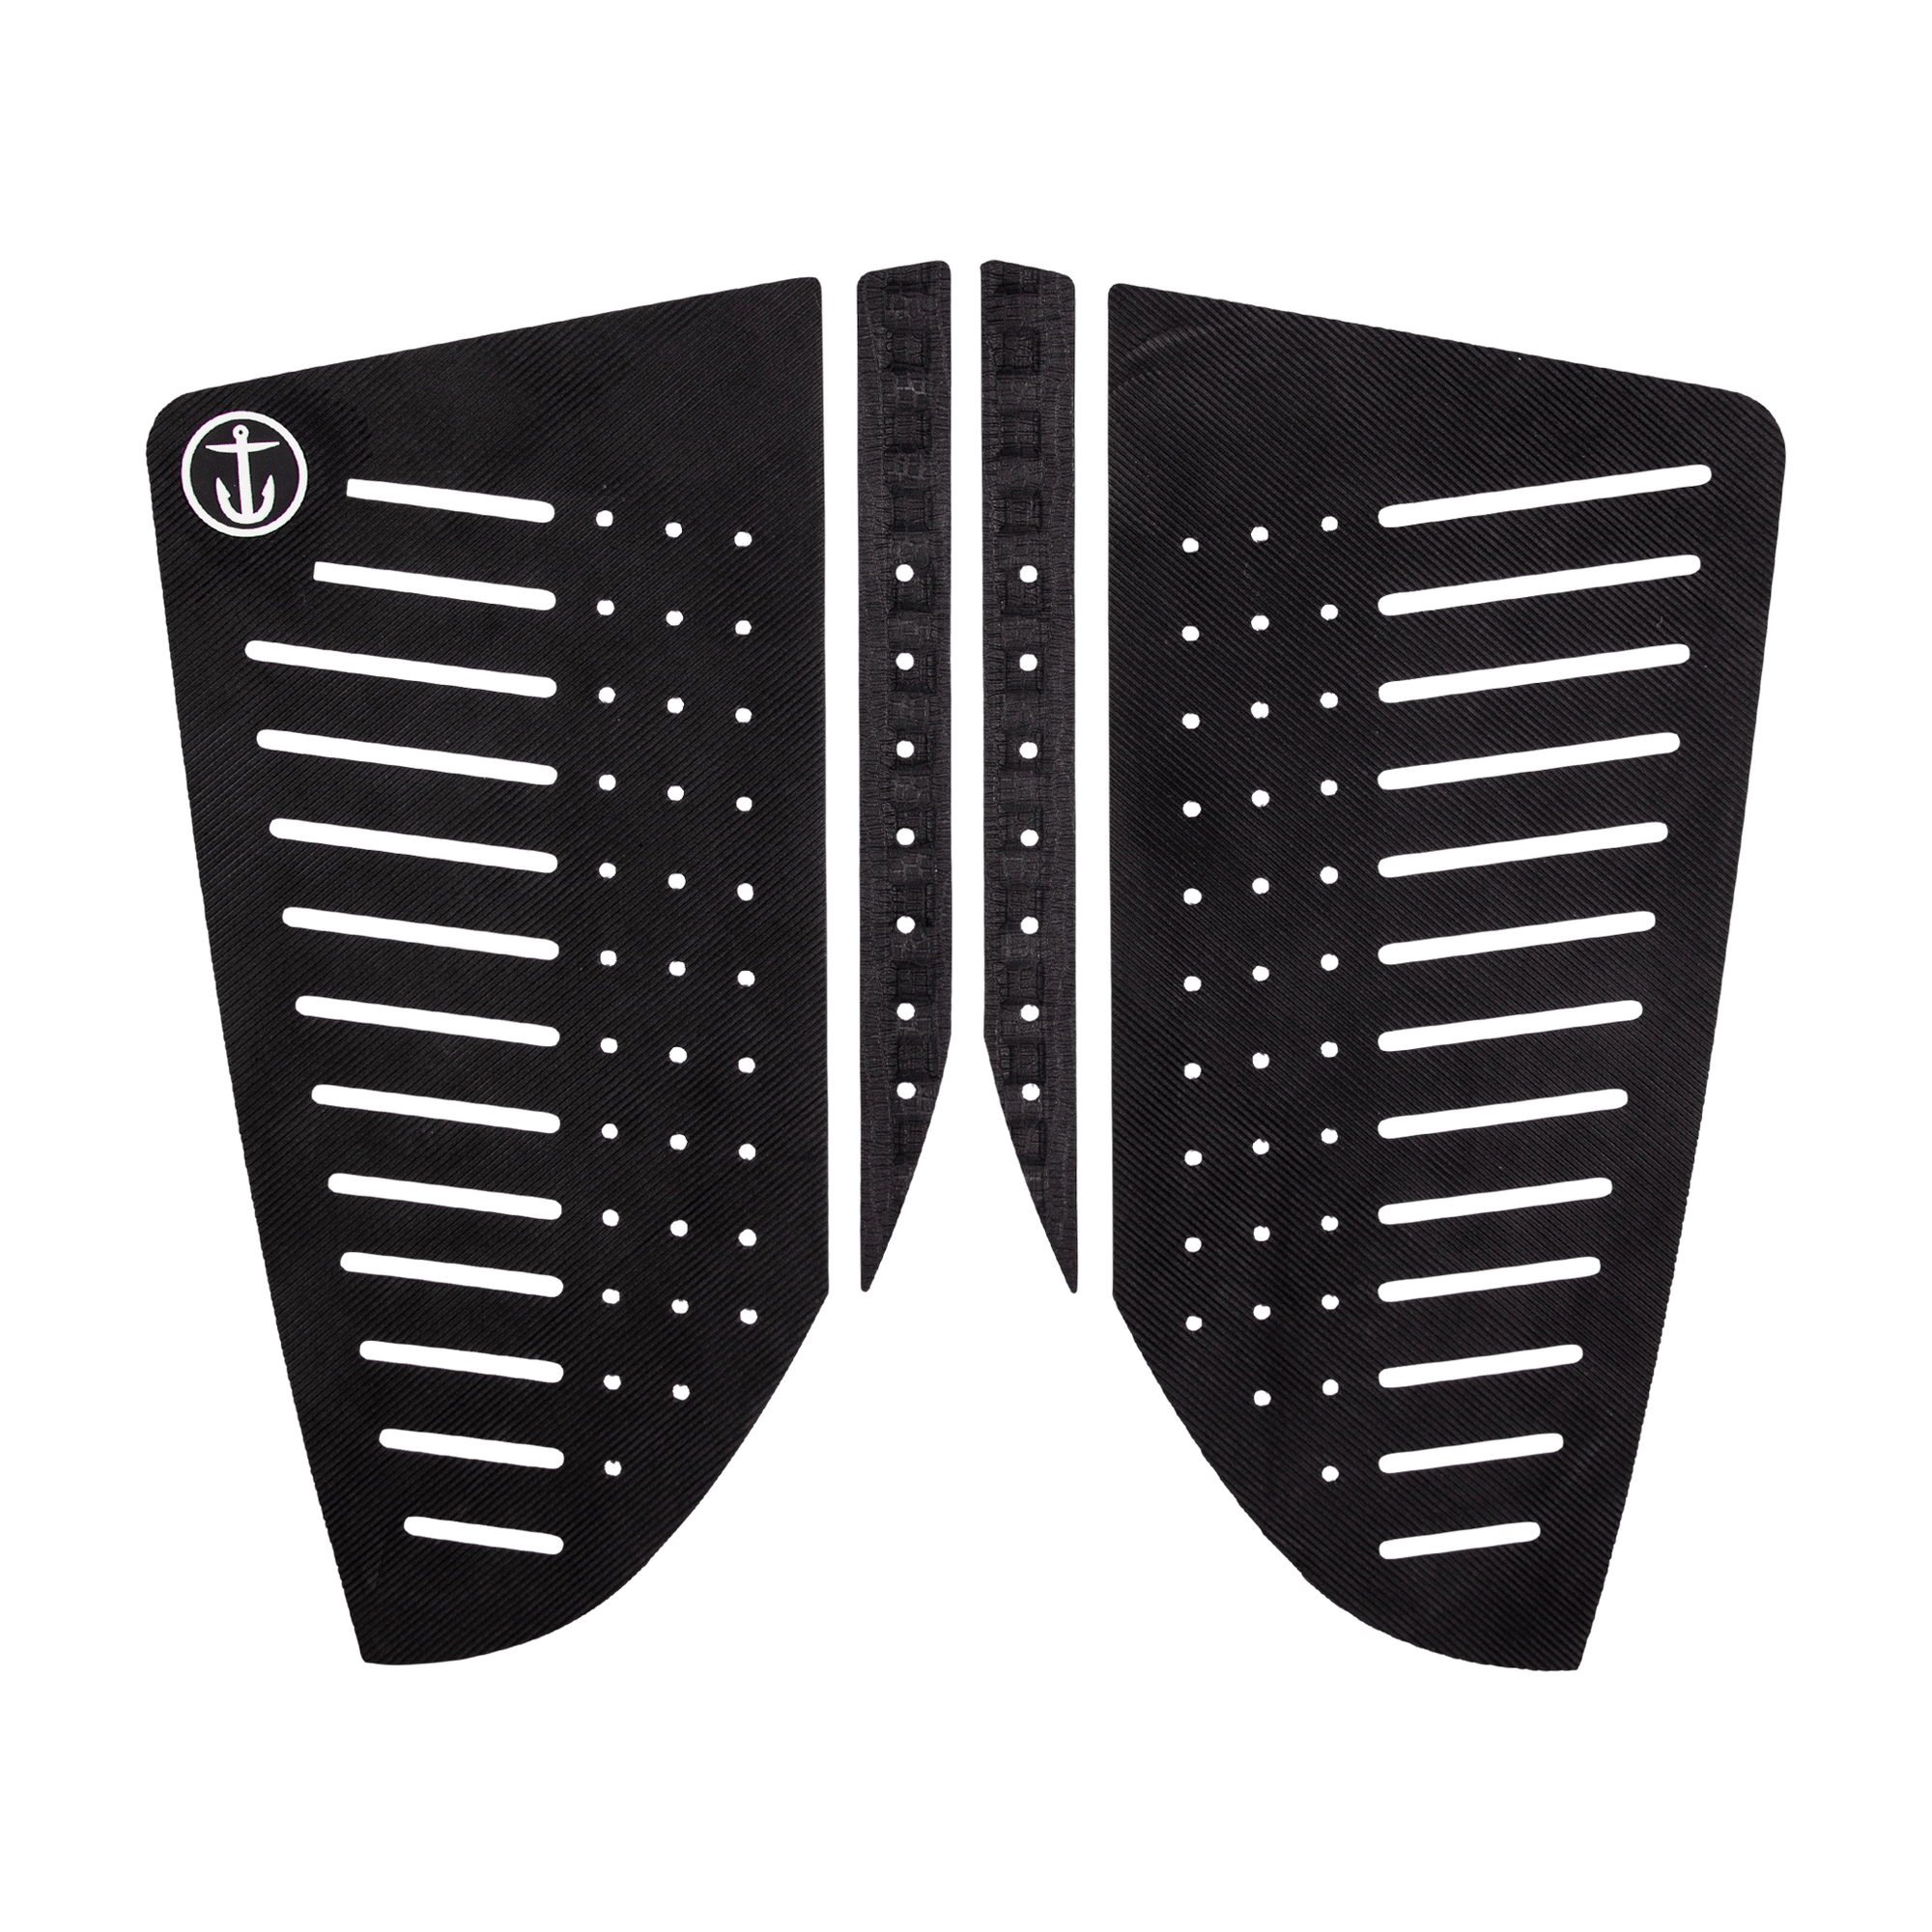 TROOPER 2 TRACTION PAD - Black